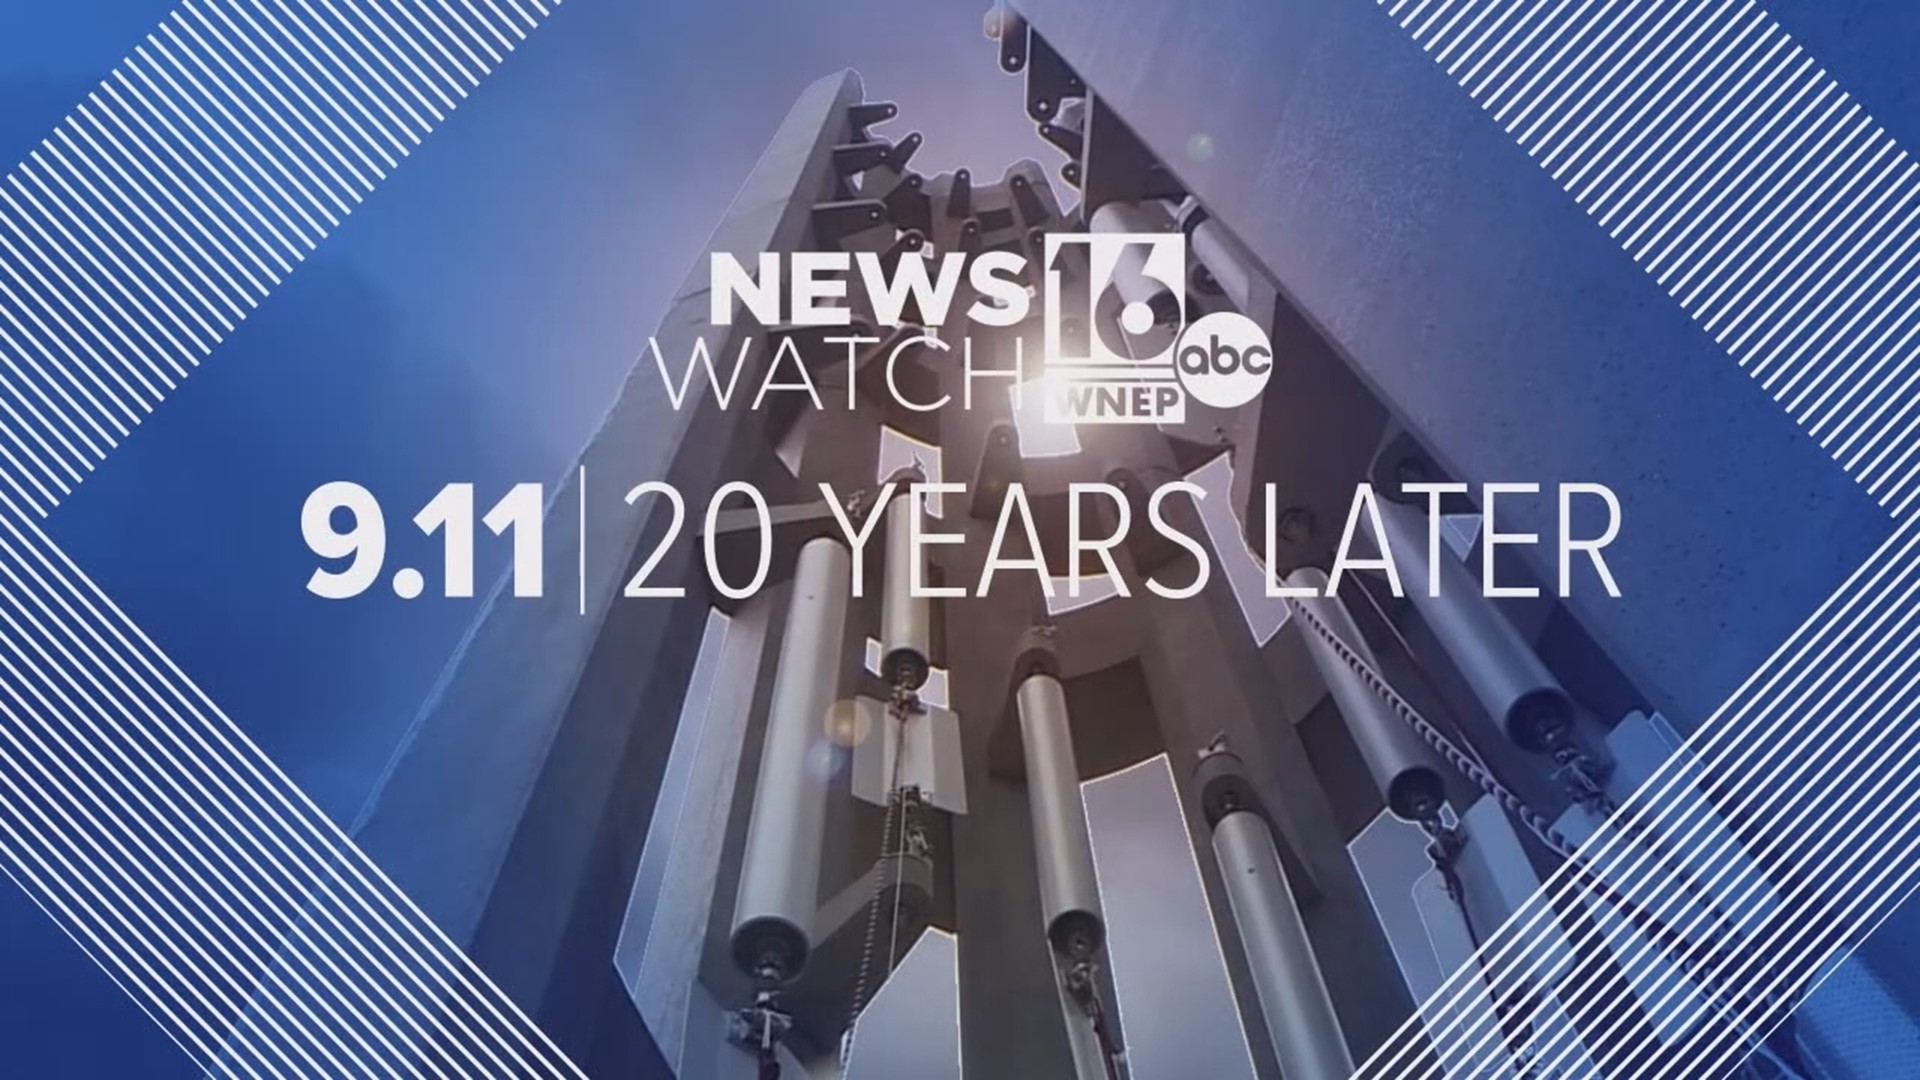 In 2021, WNEP presented a special commemorating the 20th anniversary of 9/11.